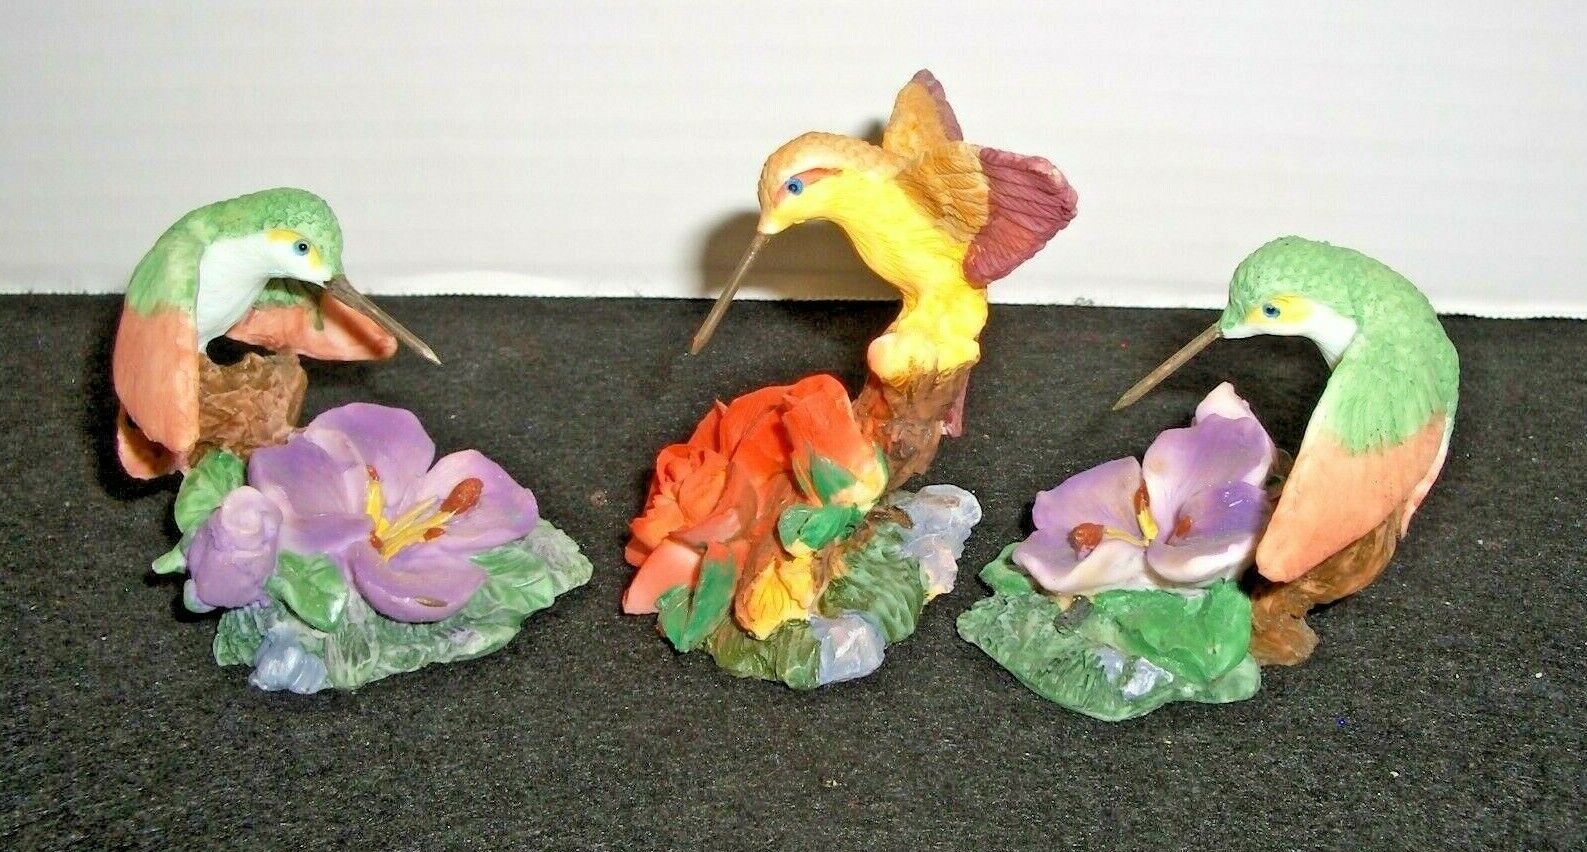 3 Pc. HUMMINGBIRD FIGURINES WITH FLORAL MADE OF POLYRESIN.